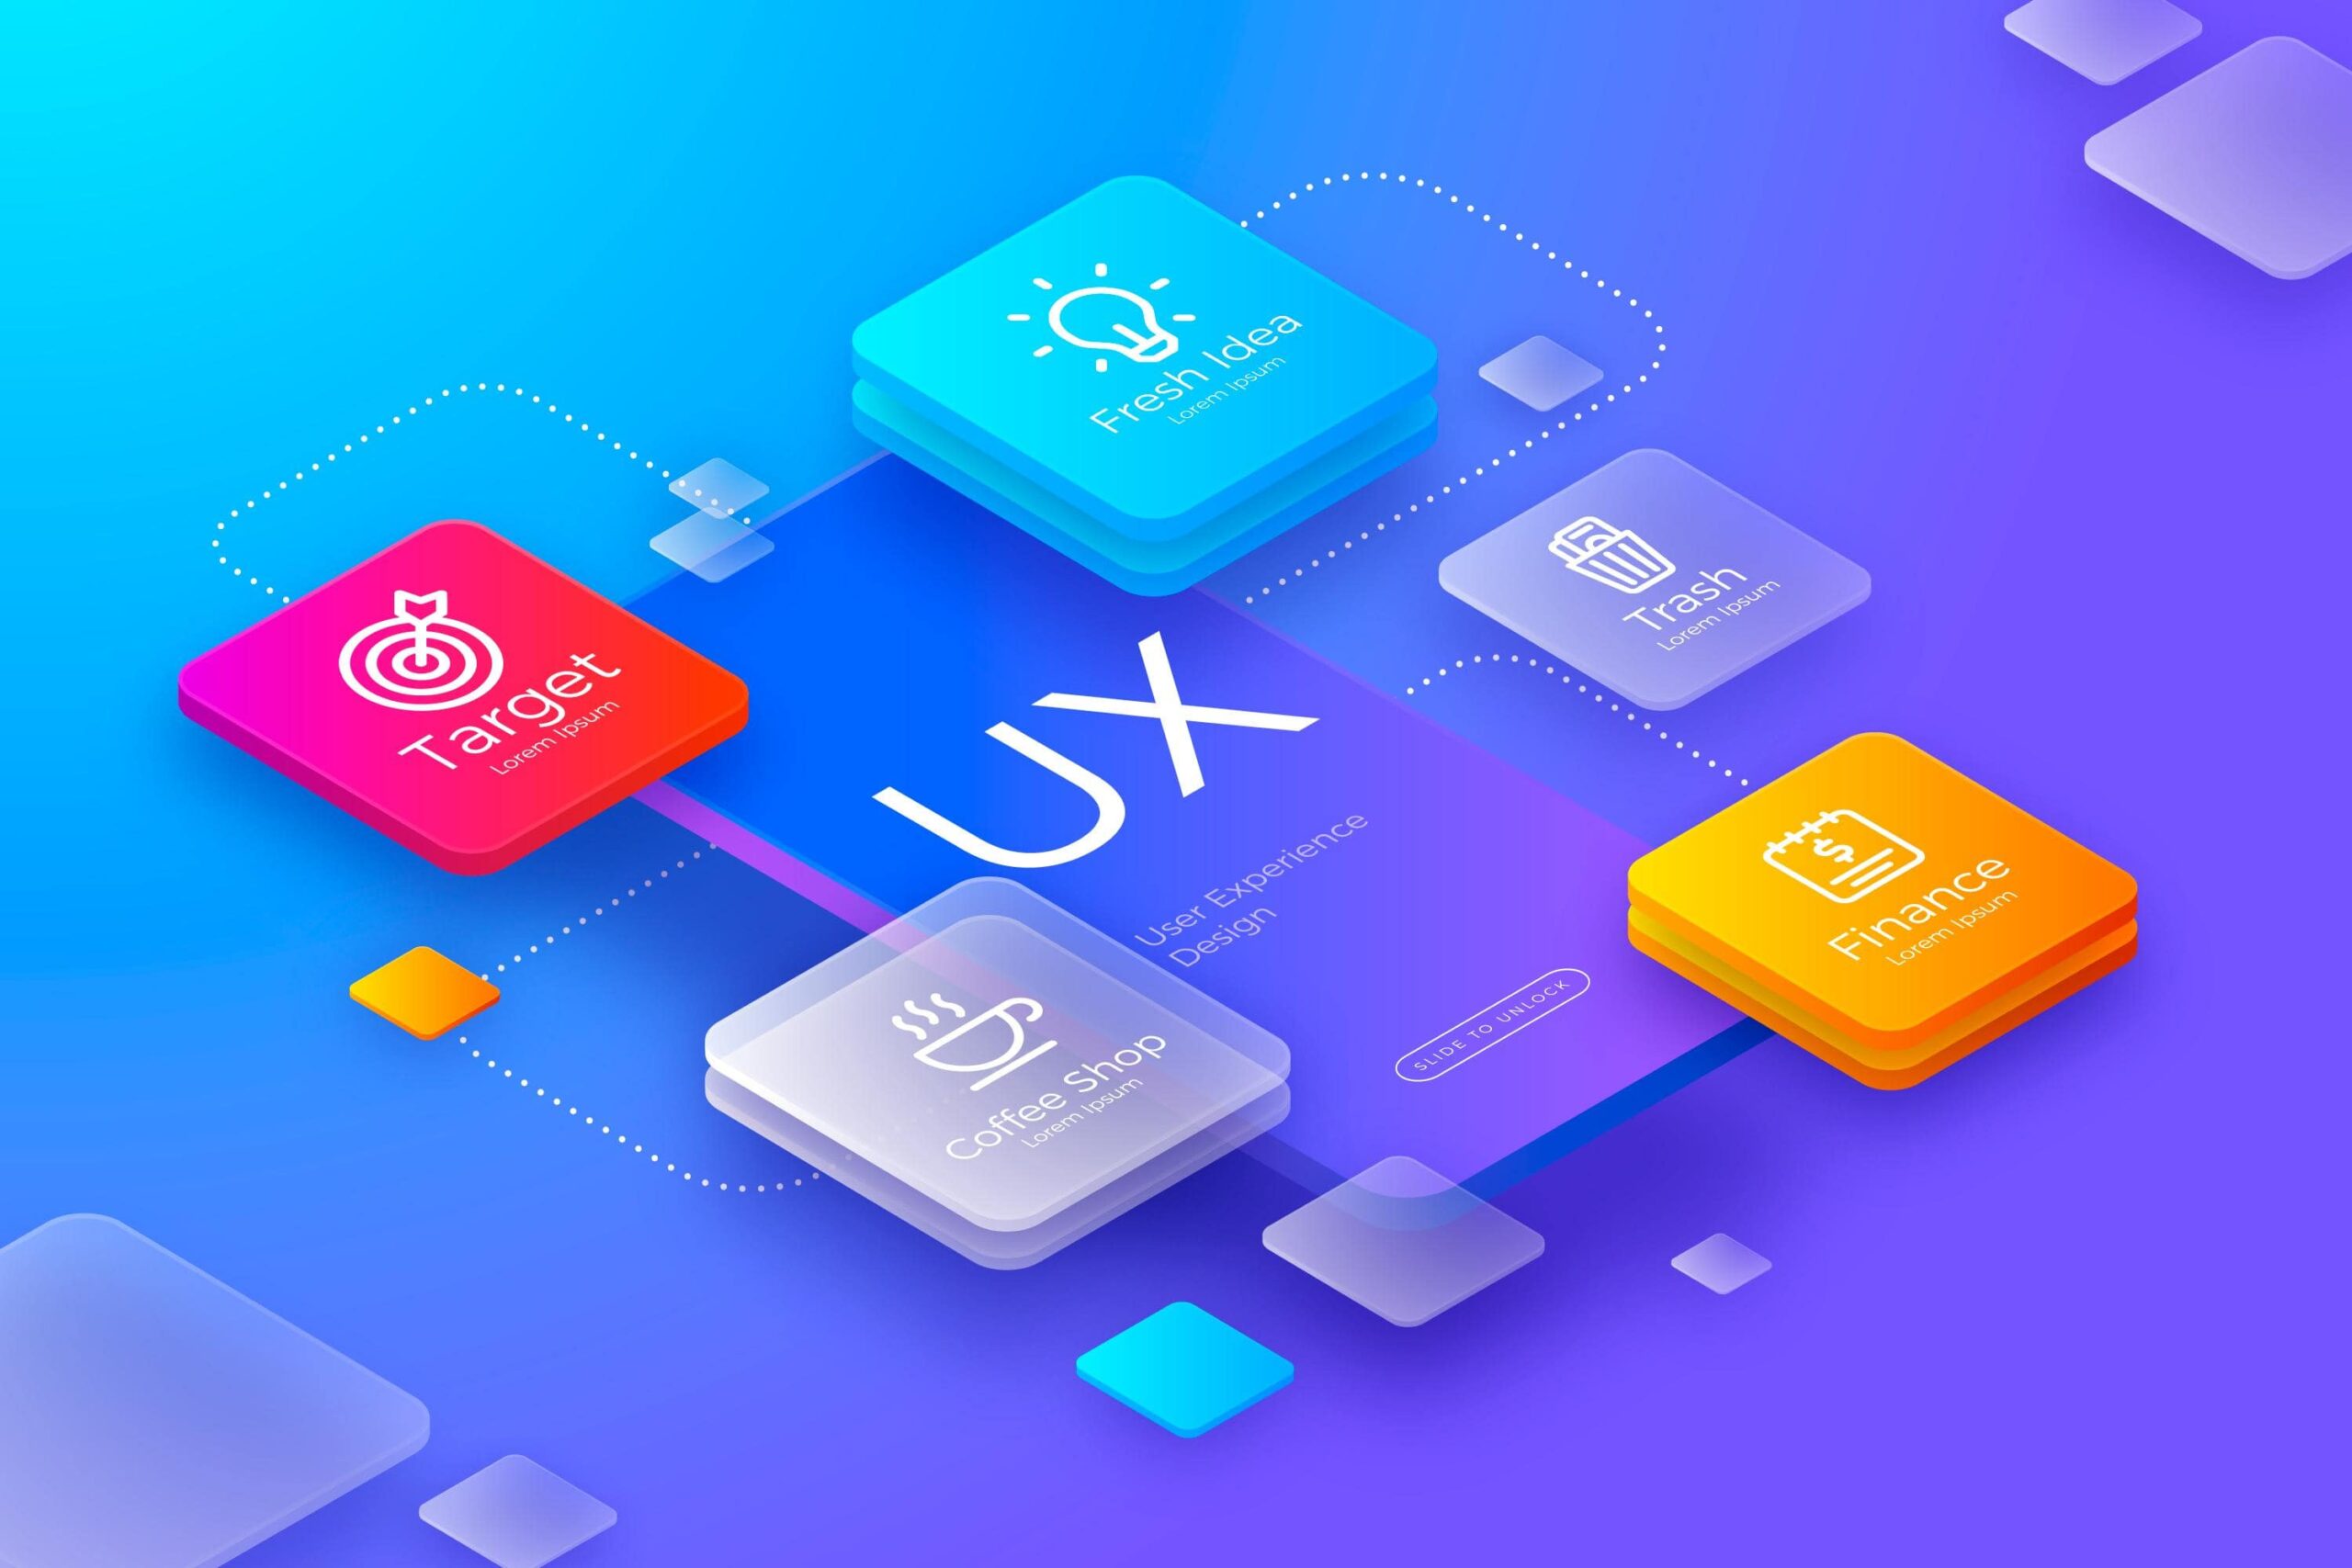 Importance Of UX Design In Business
